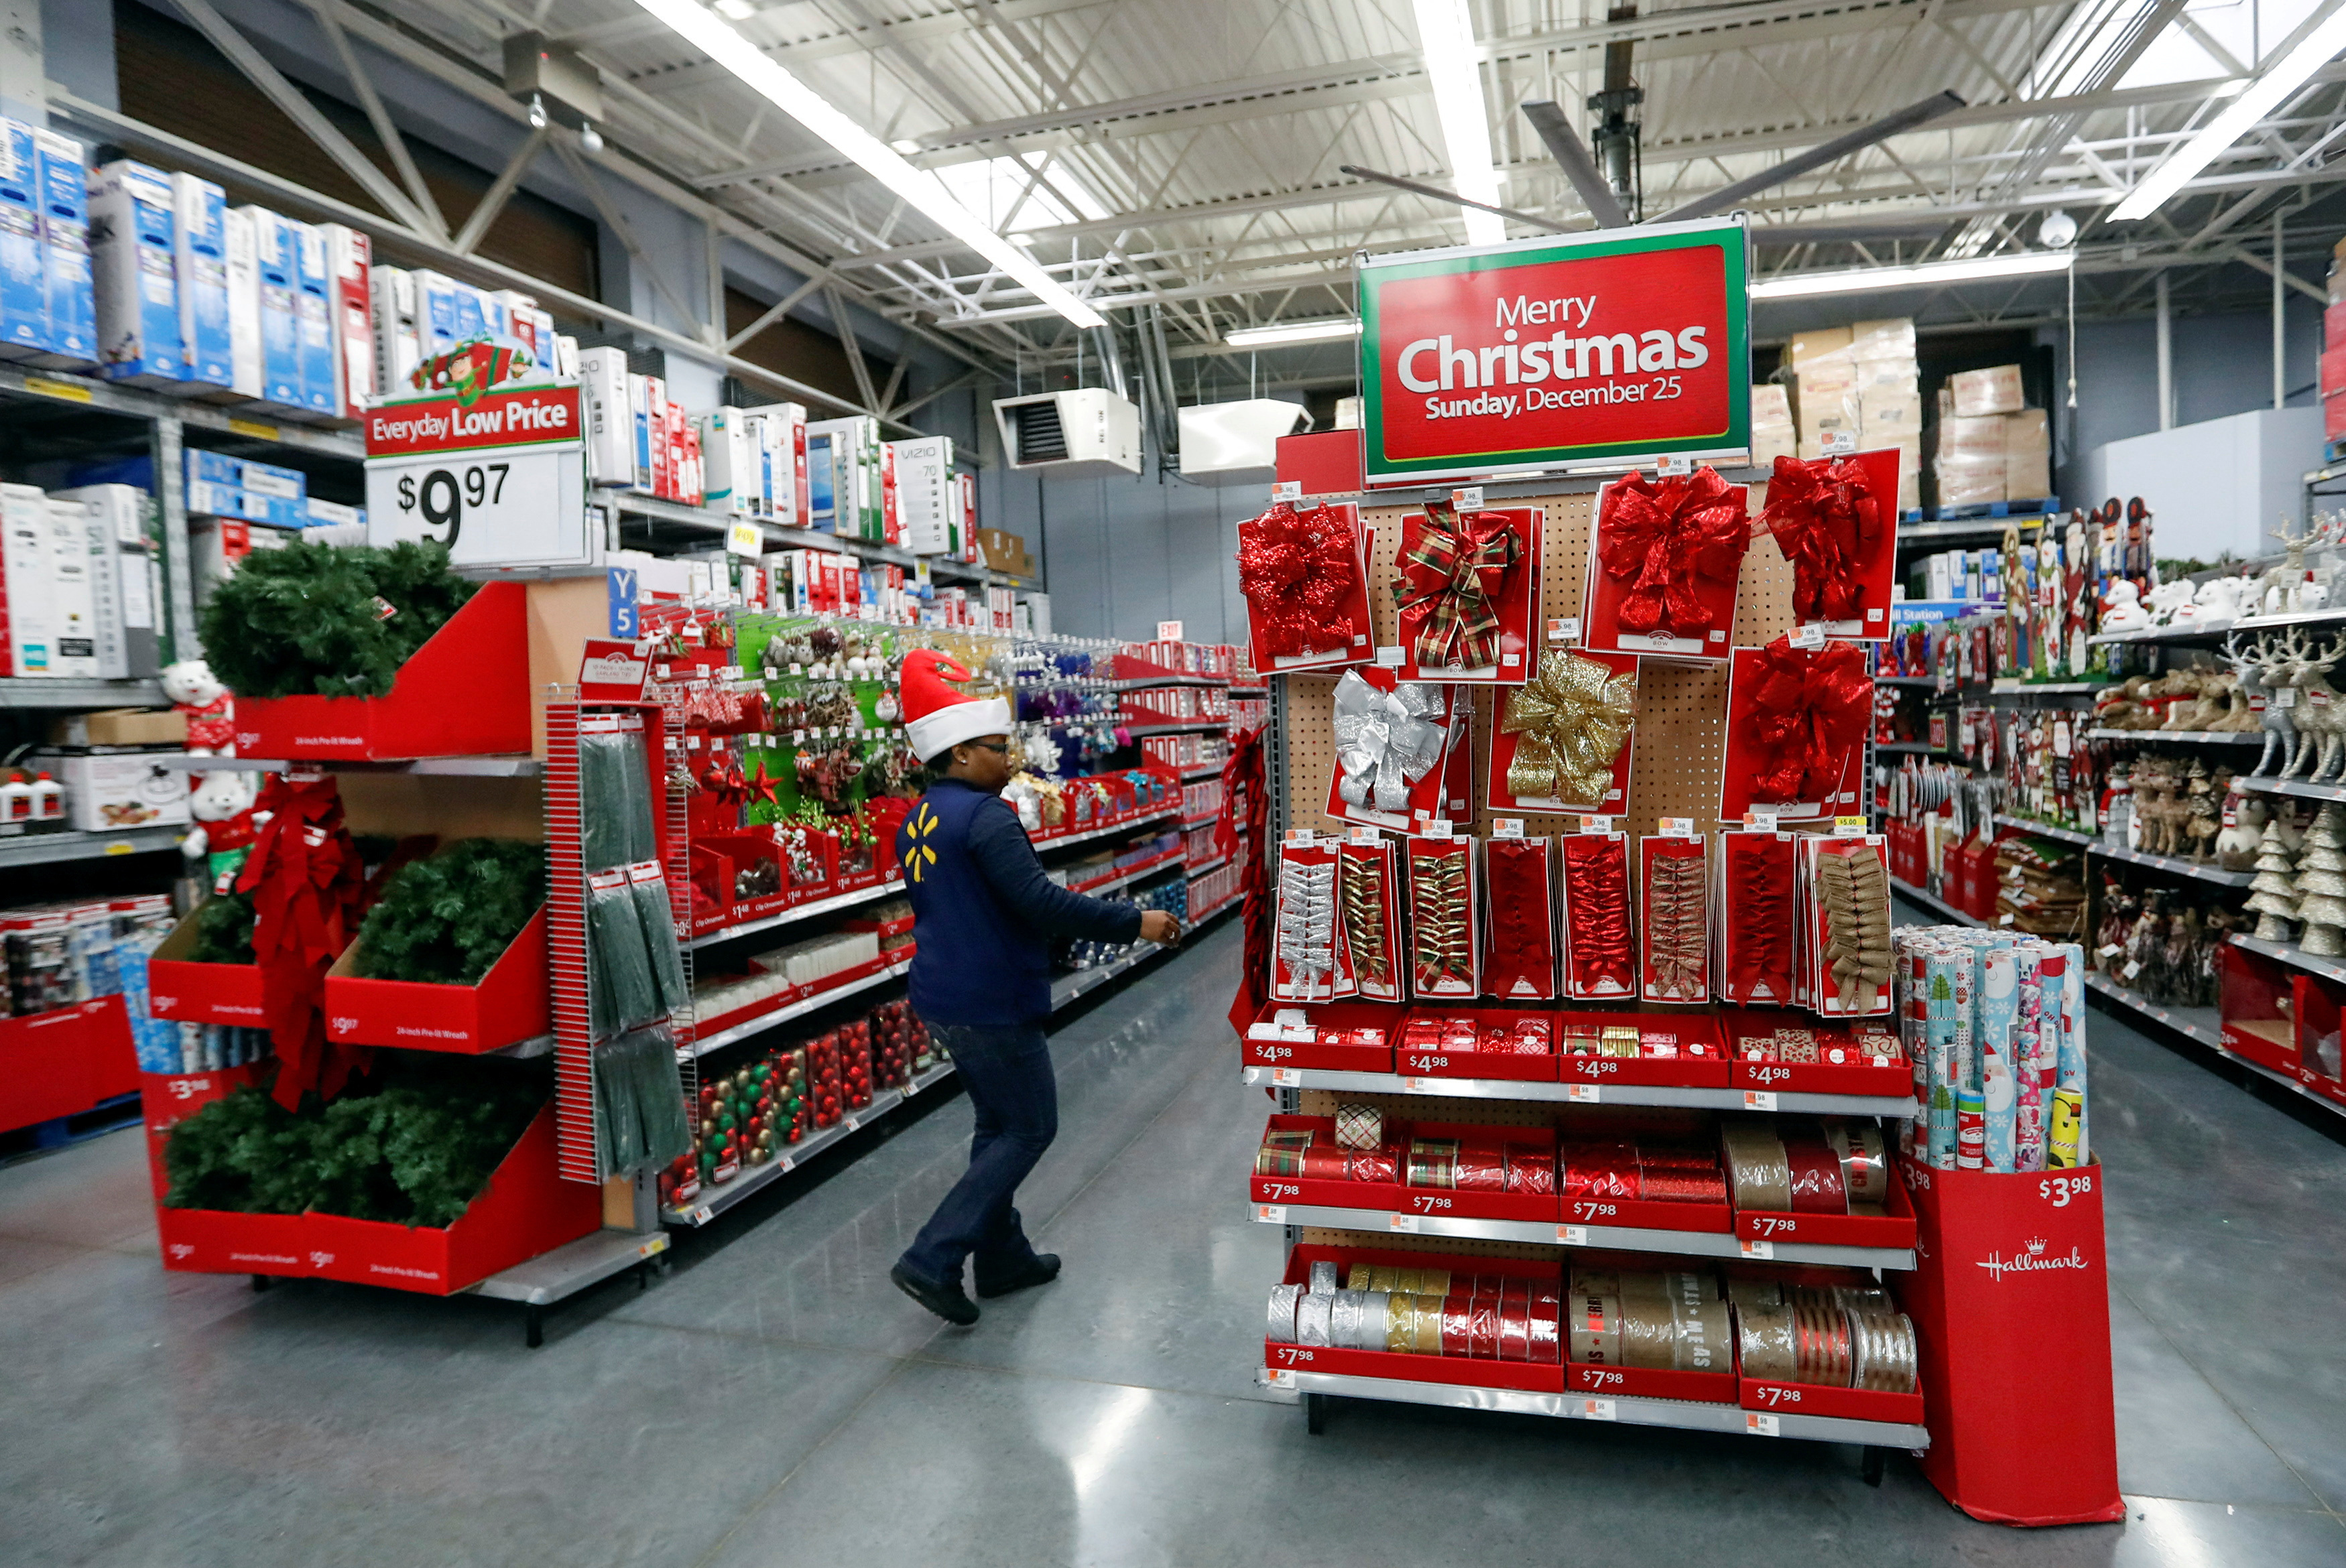 HomeGoods launches online store just in time for the holidays